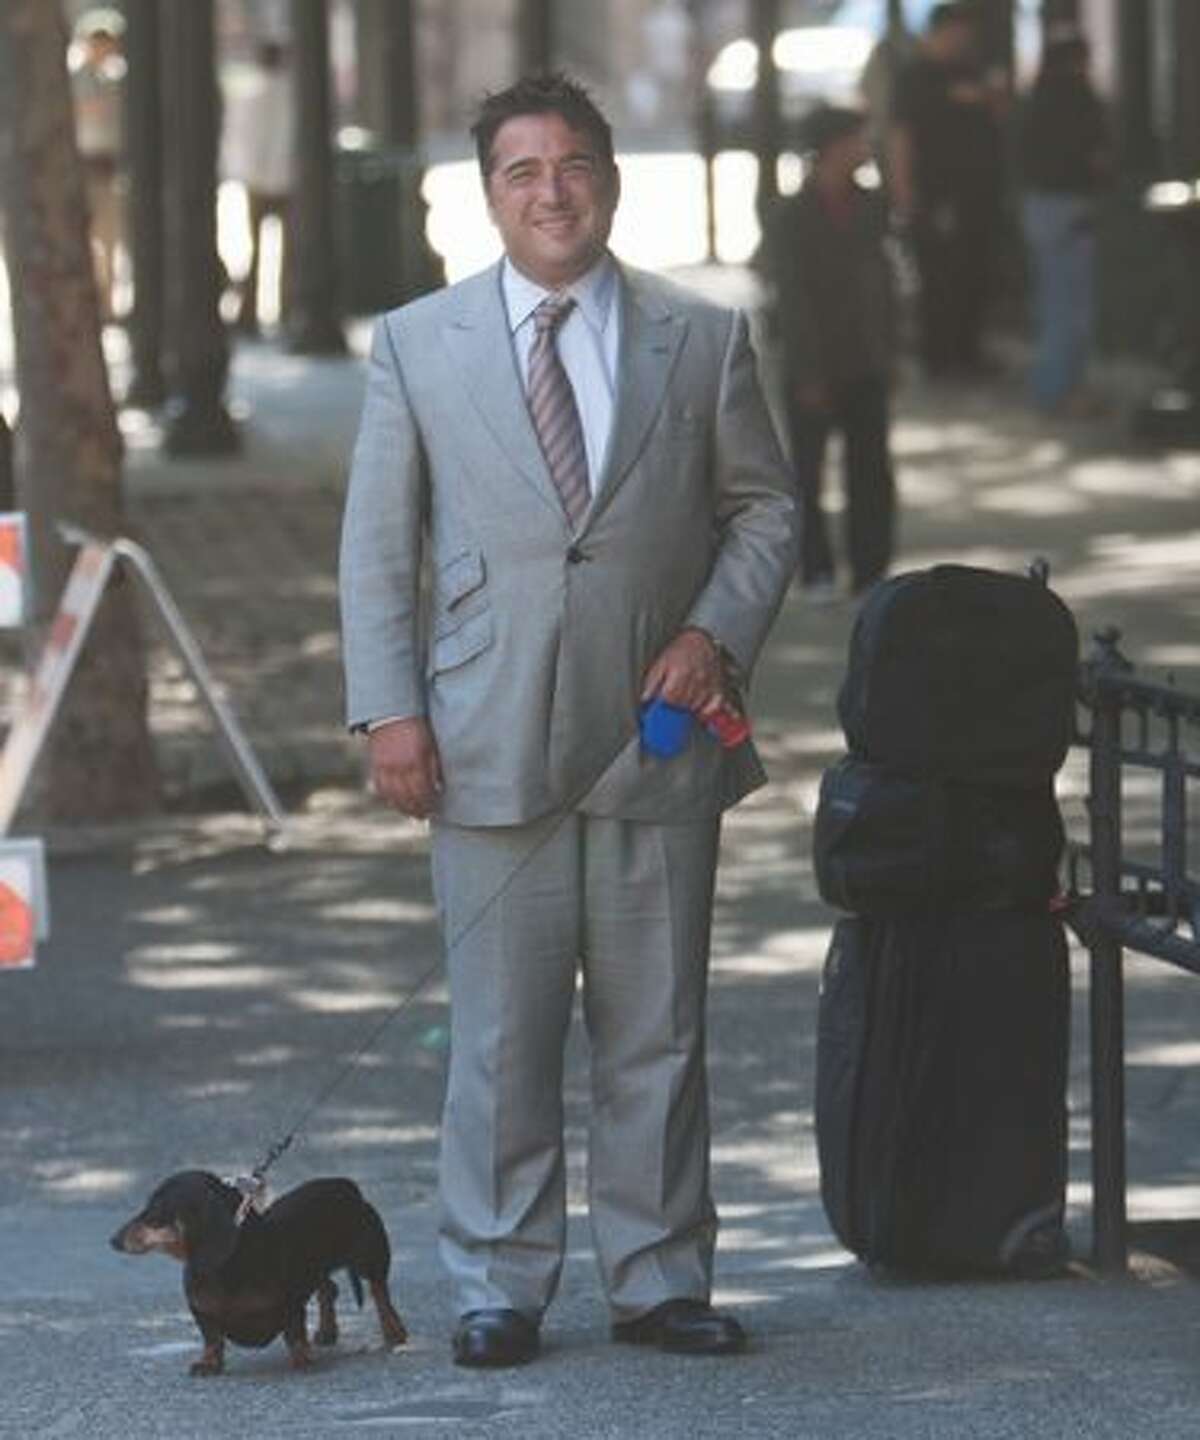 Matthew Bergman confidently strode through Pioneer Square, casually sporting his usual work suit accompanied by his dachshund.